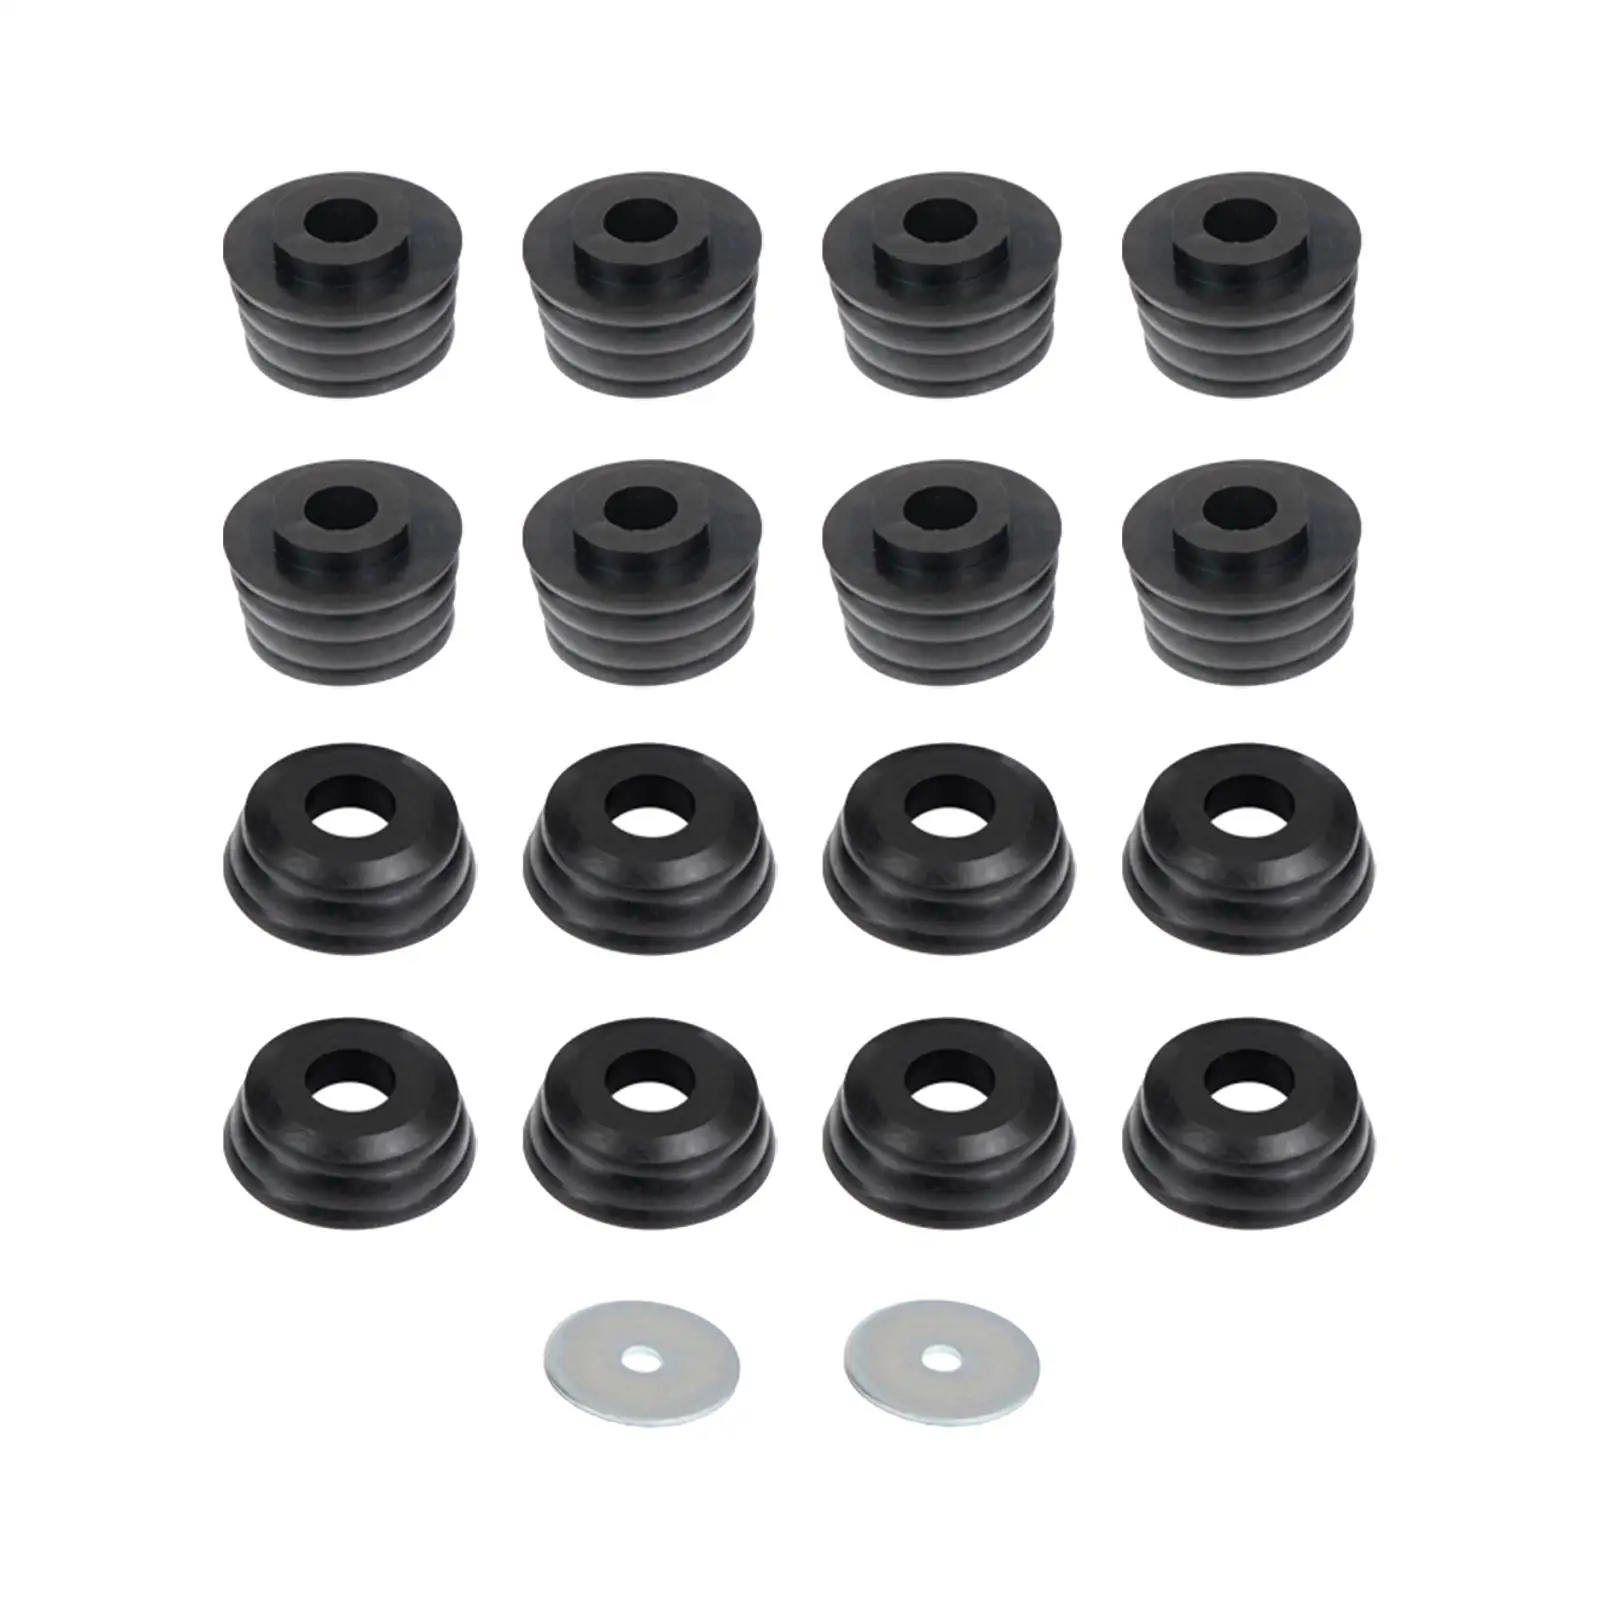 Body Cab Bushing Kit Replacement for Chevy Silverado 1999-2014 2WD 4WD